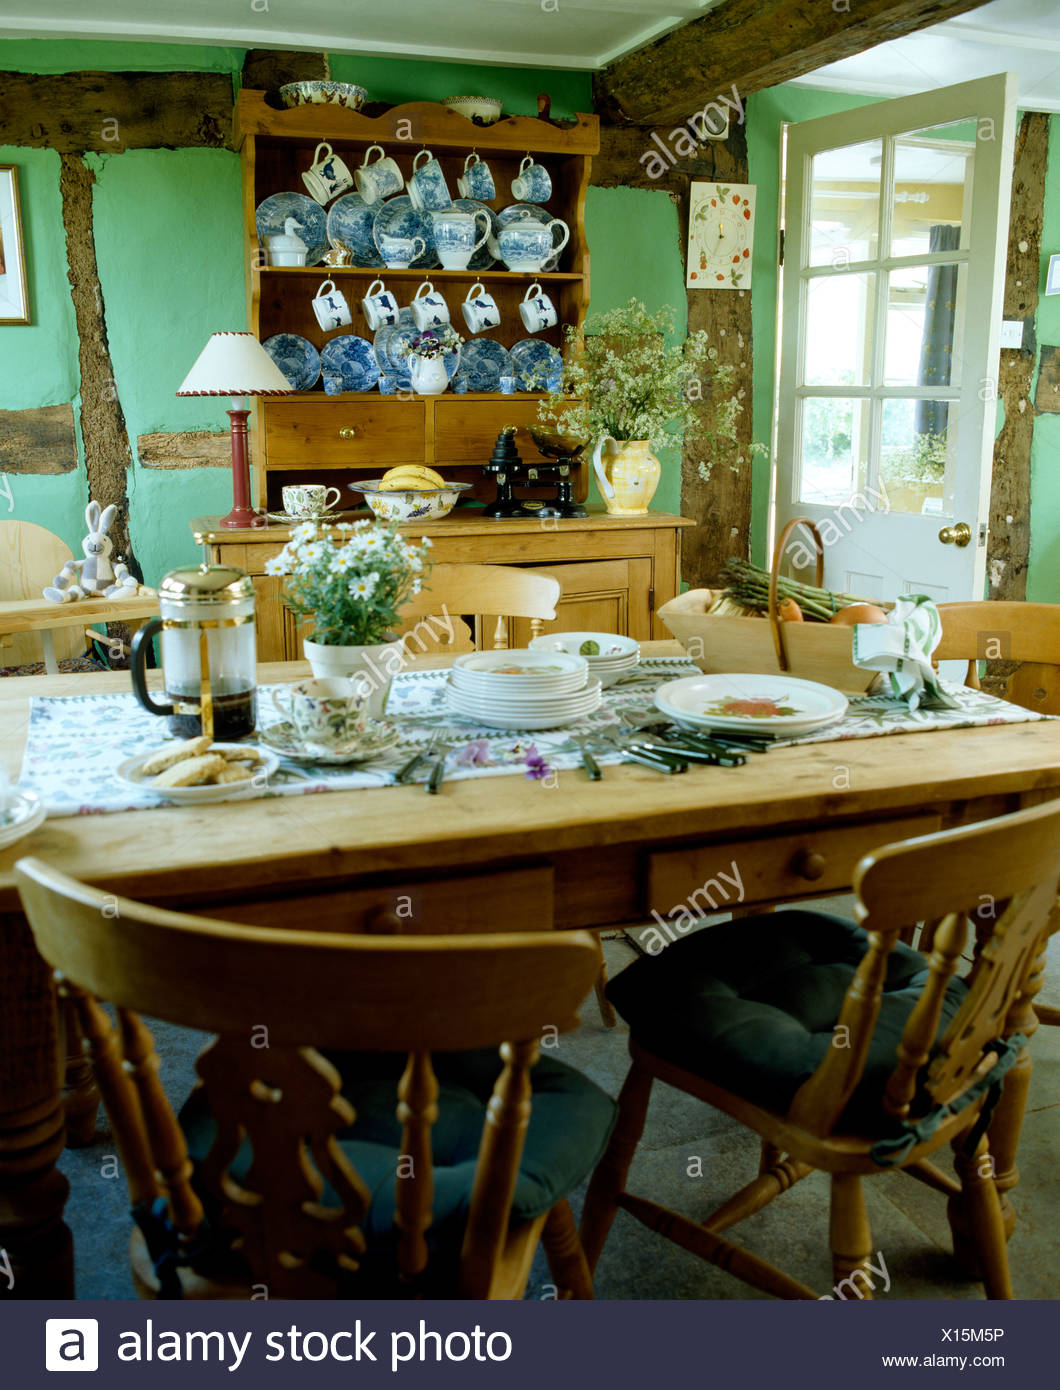 Pine Chairs At Pine Table Set For Breakfast In Pale Green Country